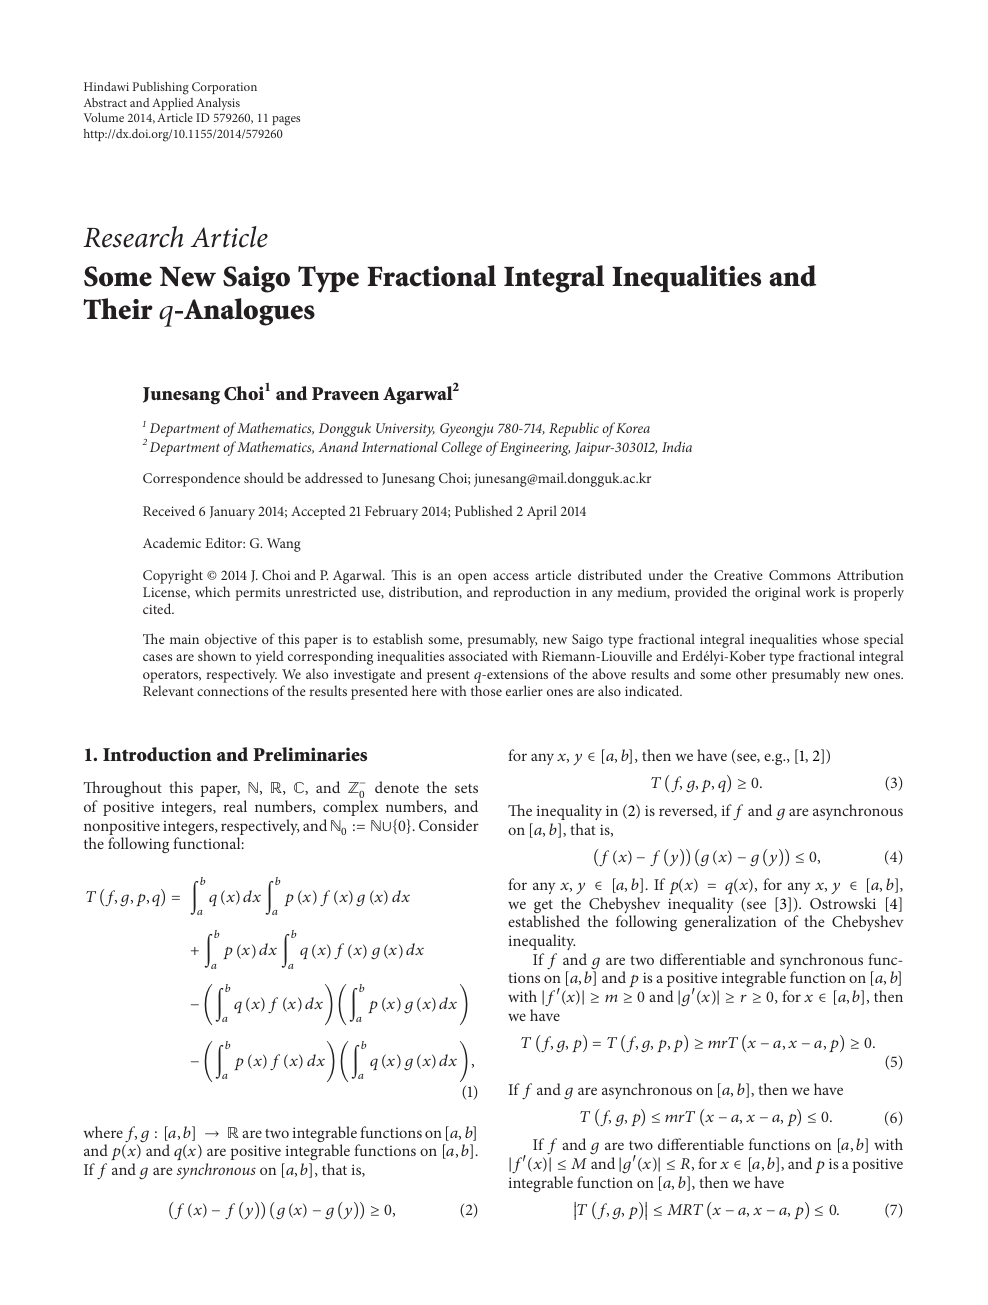 Some New Saigo Type Fractional Integral Inequalities And Their Q Analogues Topic Of Research Paper In Mathematics Download Scholarly Article Pdf And Read For Free On Cyberleninka Open Science Hub